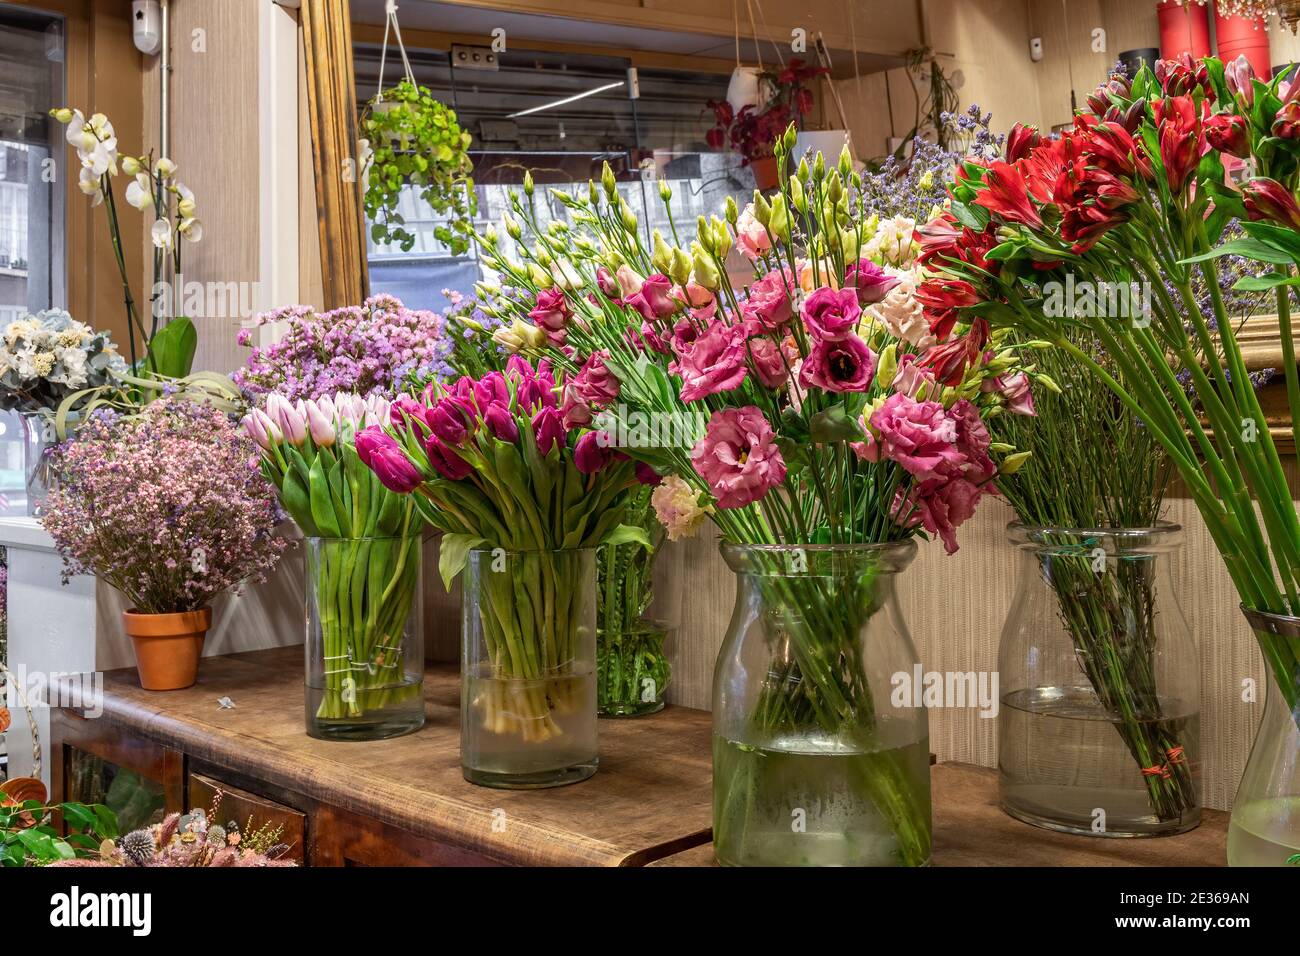 Assortment of beautiful flowers in shop for sale, placed in vases in flower shop. Tulips, roses and limonium Stock Photo